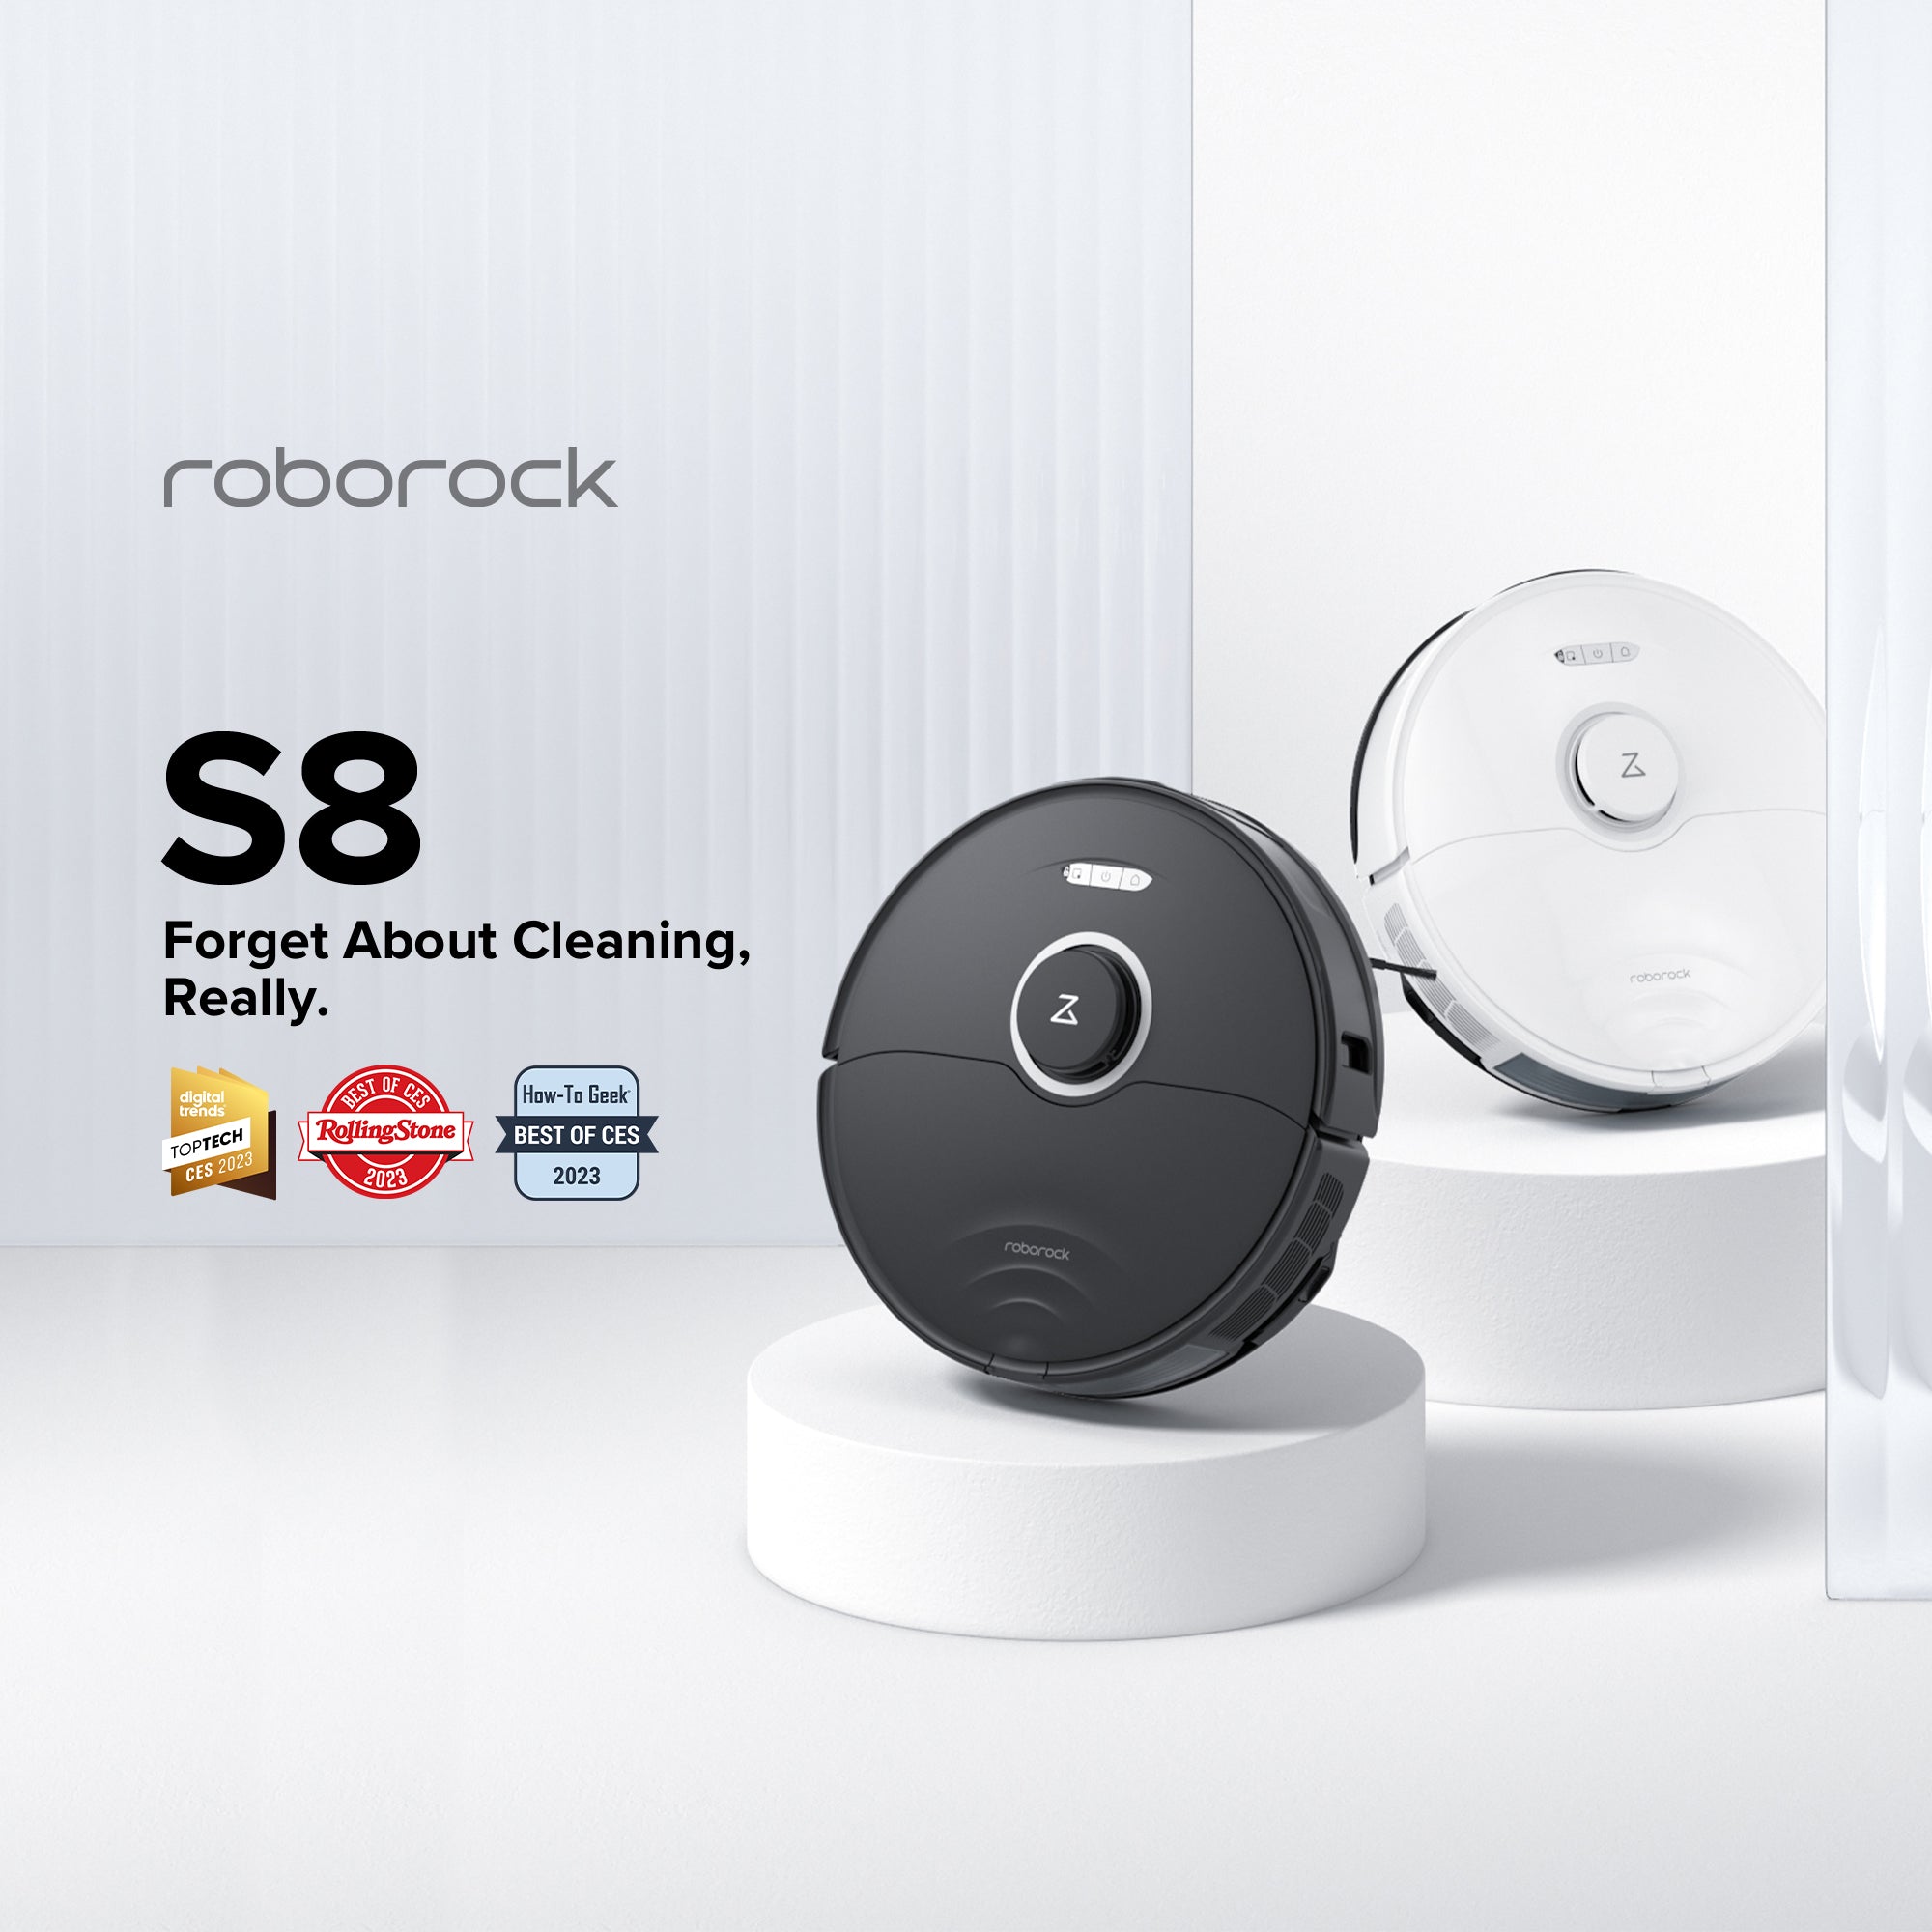 Roborock S8 series: 8 best features and key differences